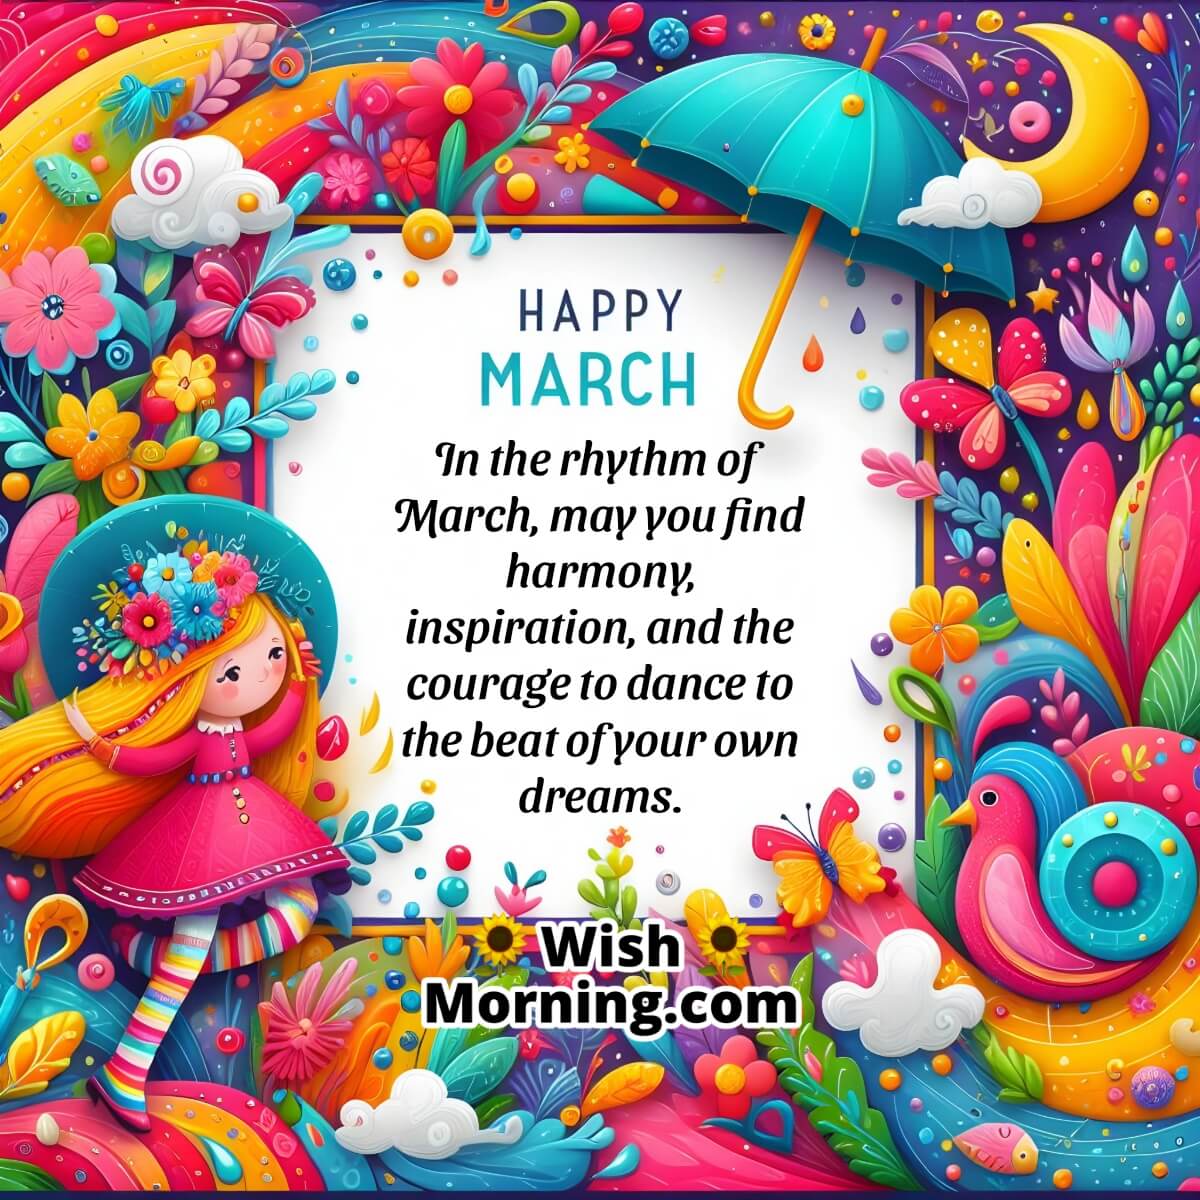 Happy March Wishes Image